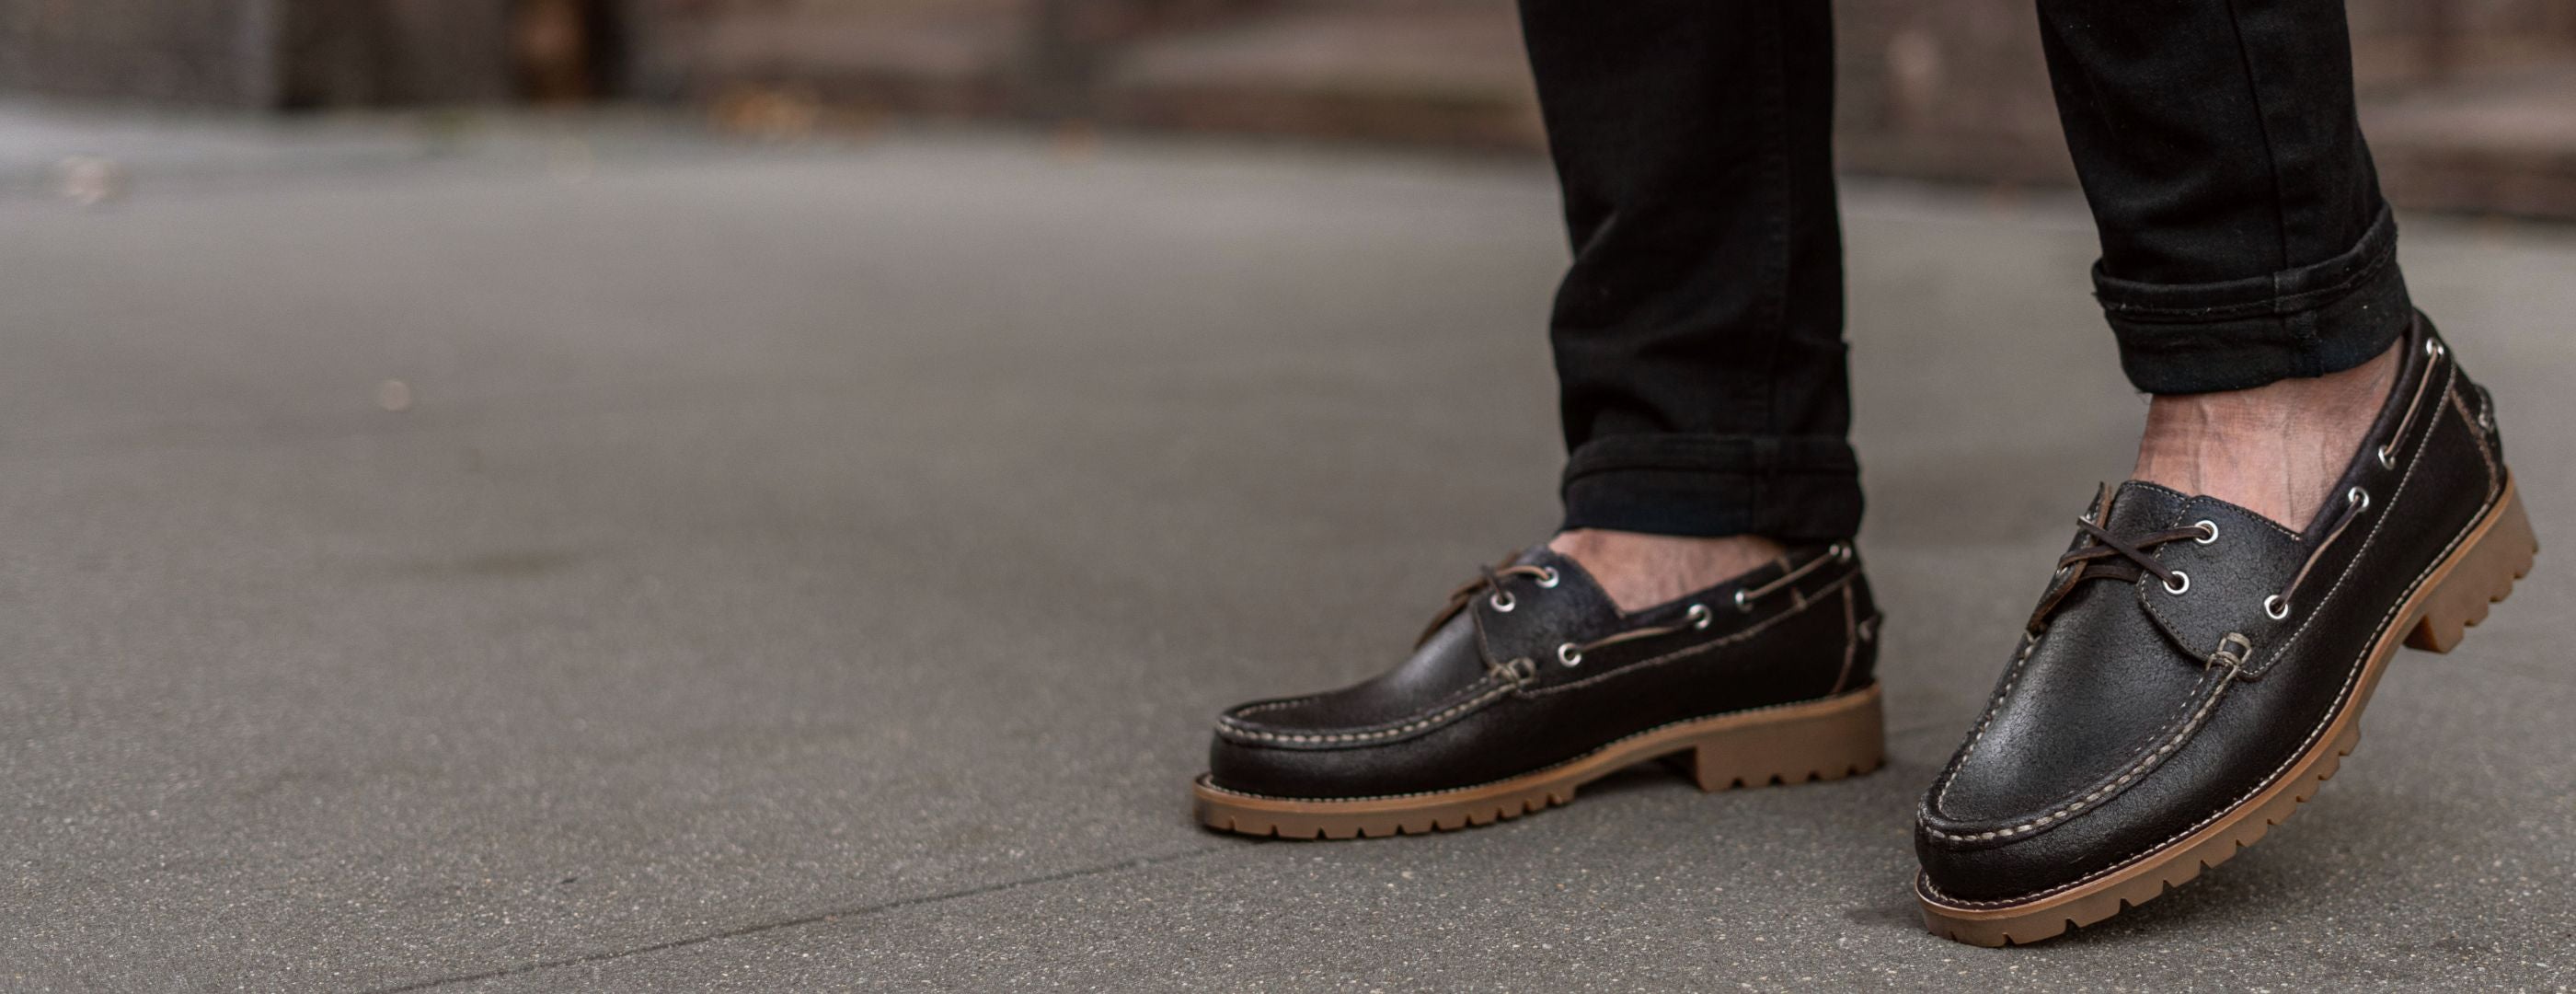 The Handsewn Loafer